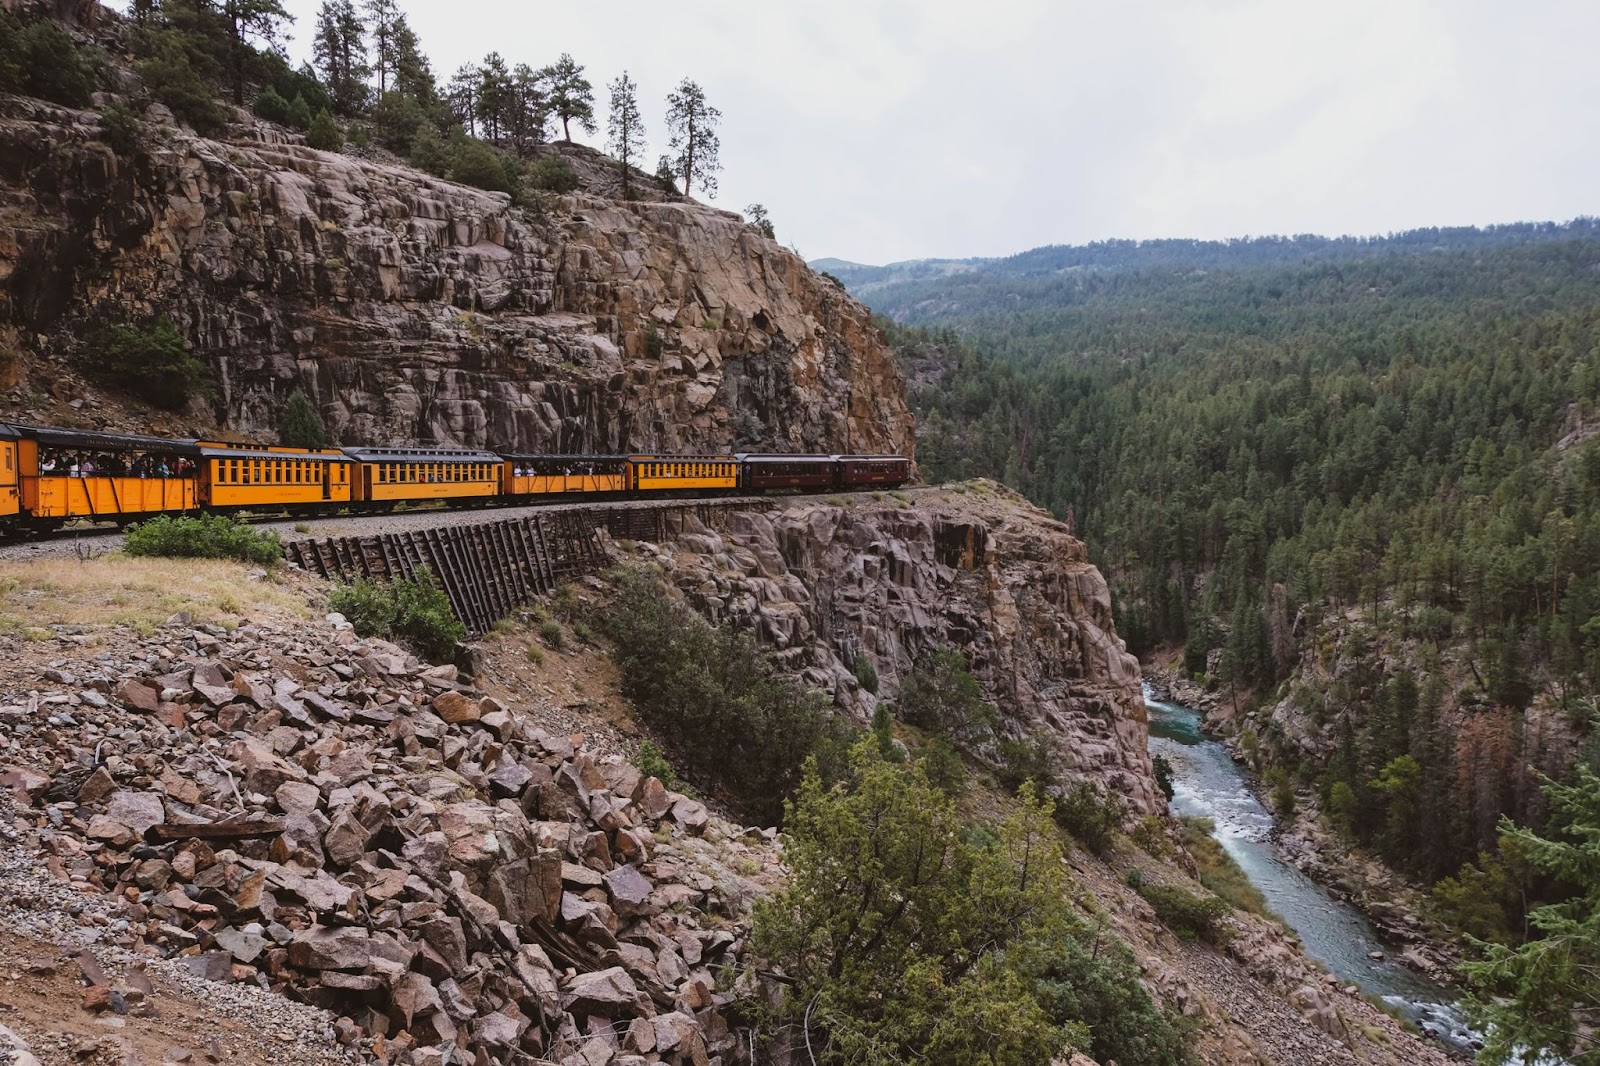 A landscape view of a train riding along the tracks with a river down below